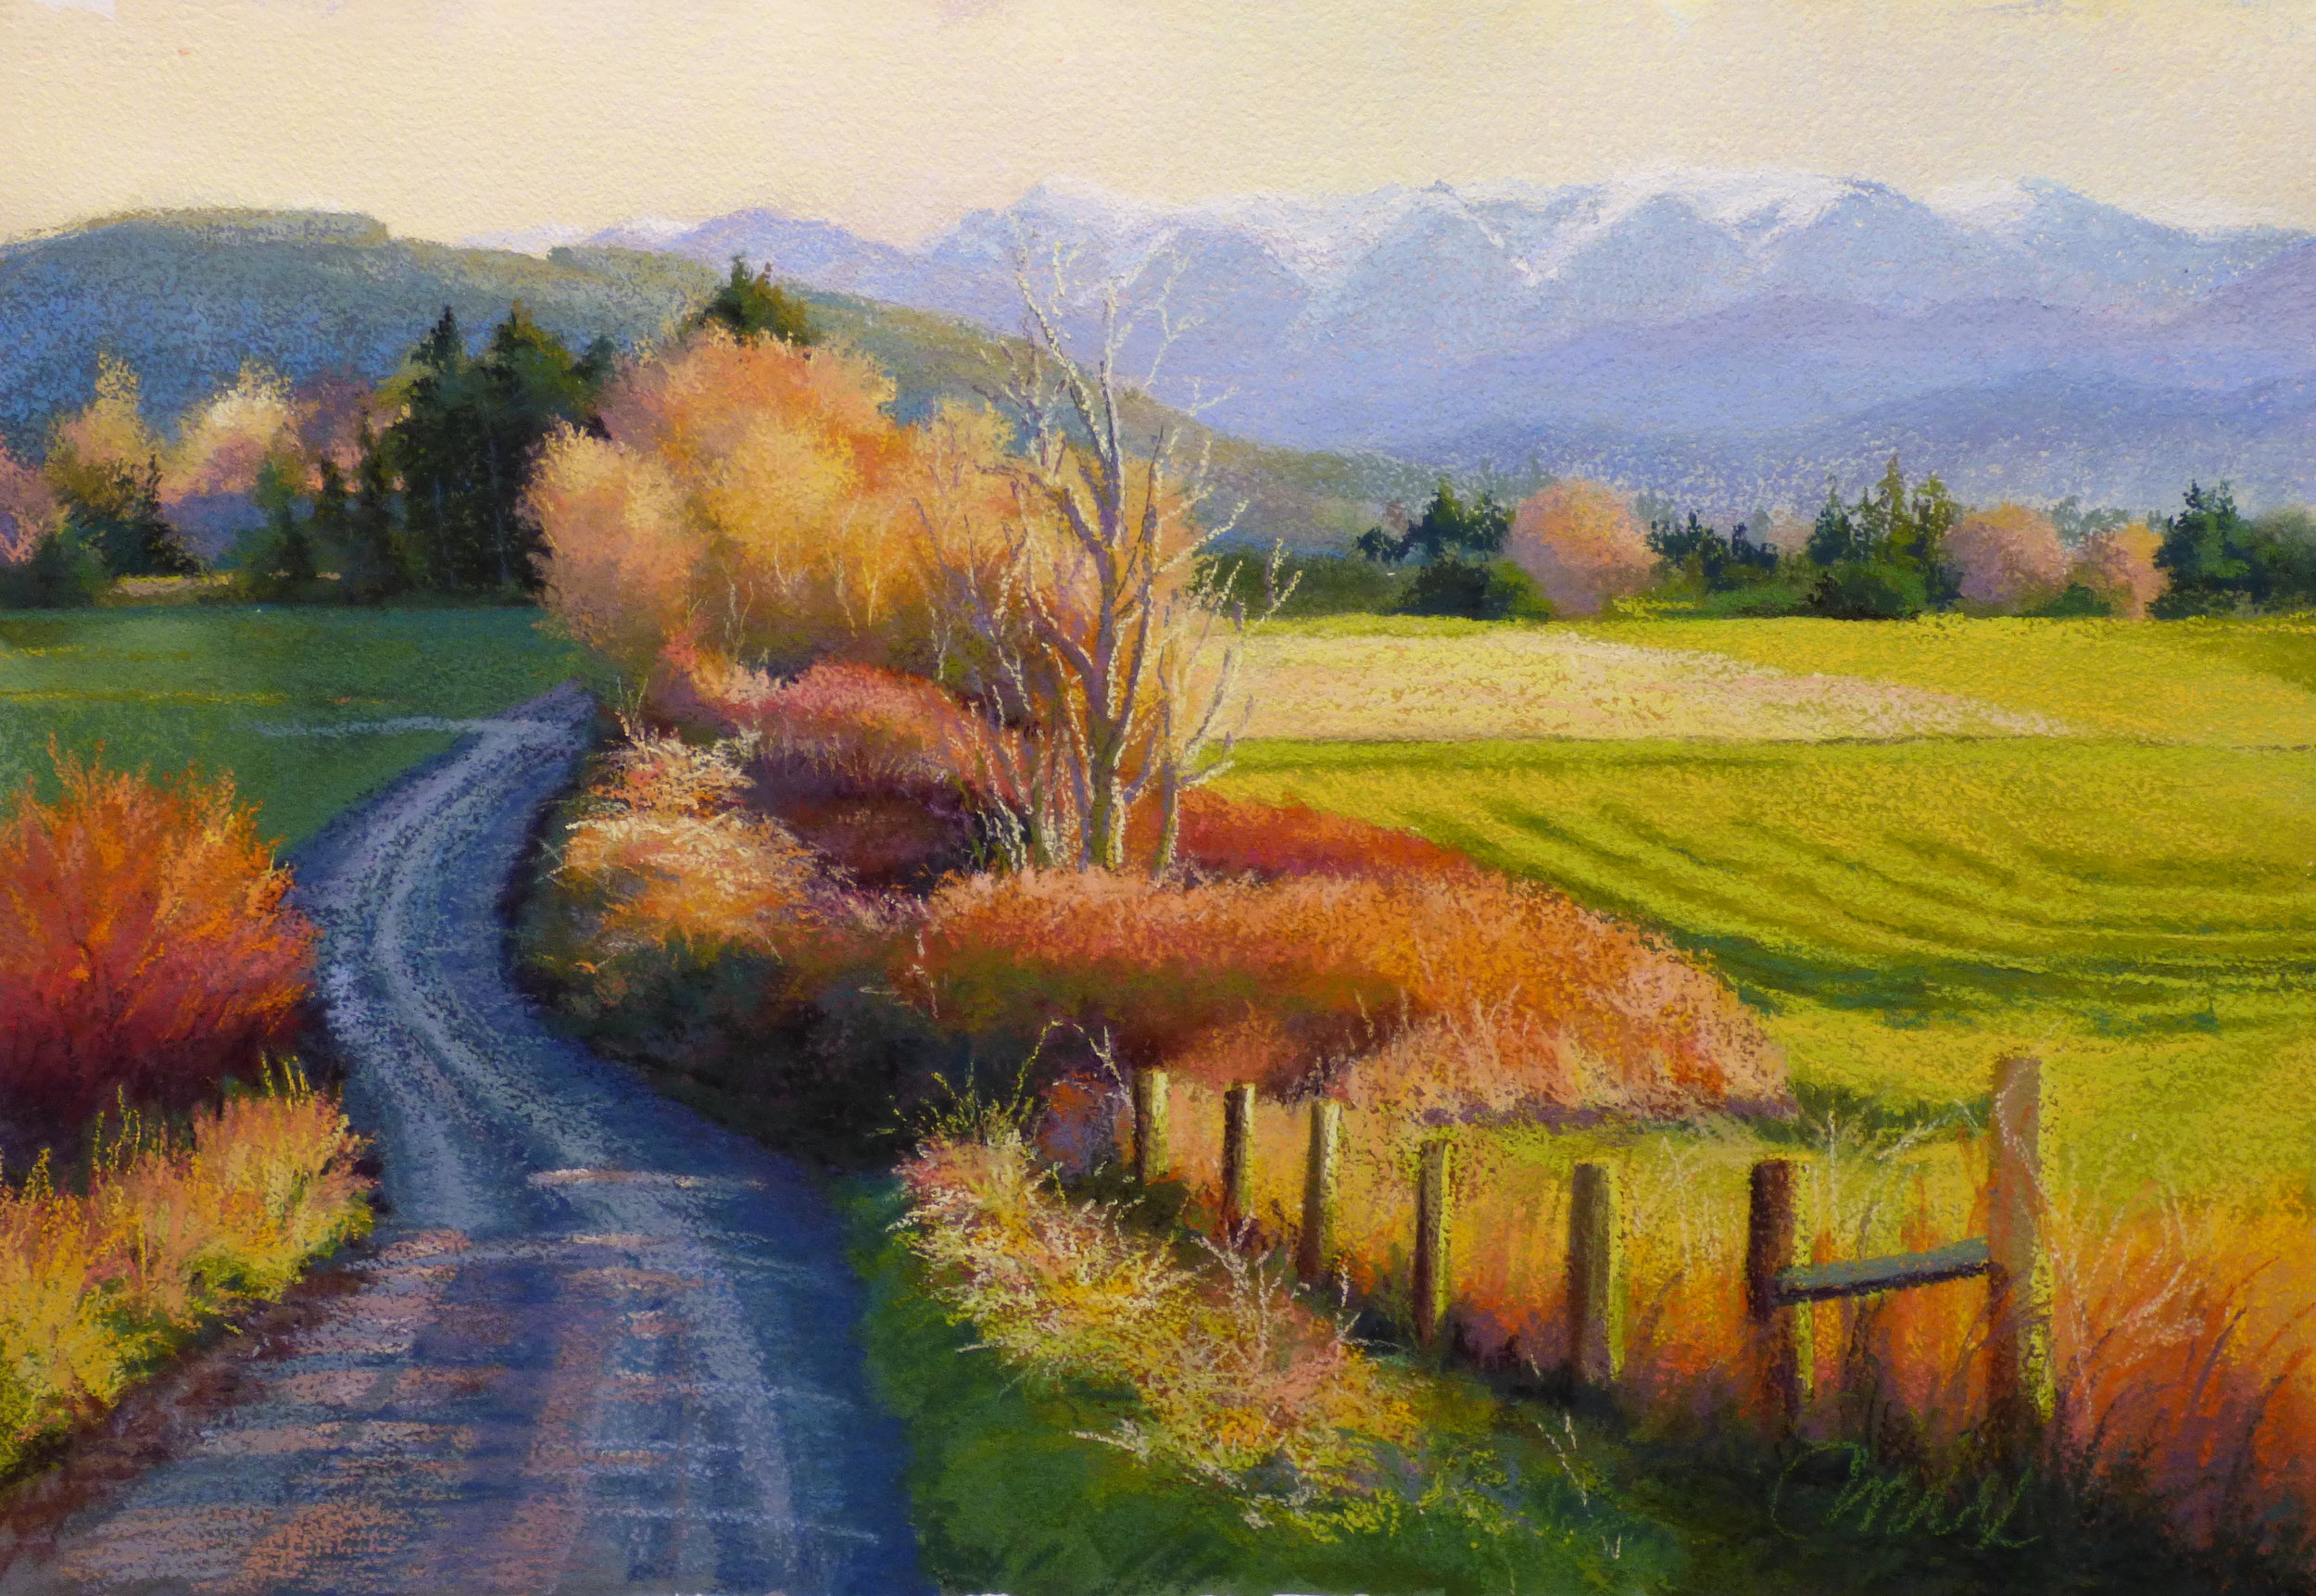 Sunset on Maple View Lane (sold)